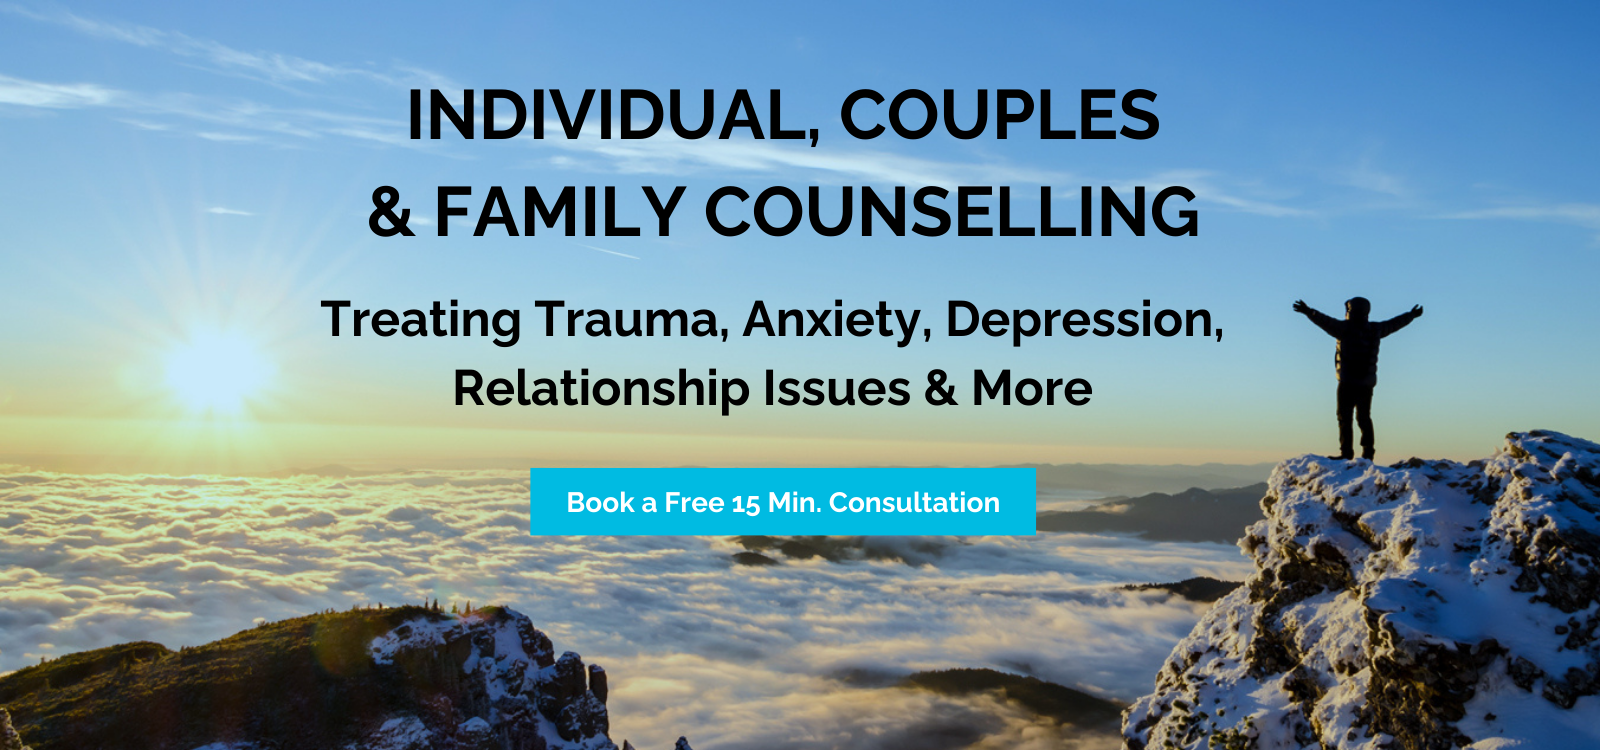 MasterMind Home Page Banner - Tile 2 Counselling Focus